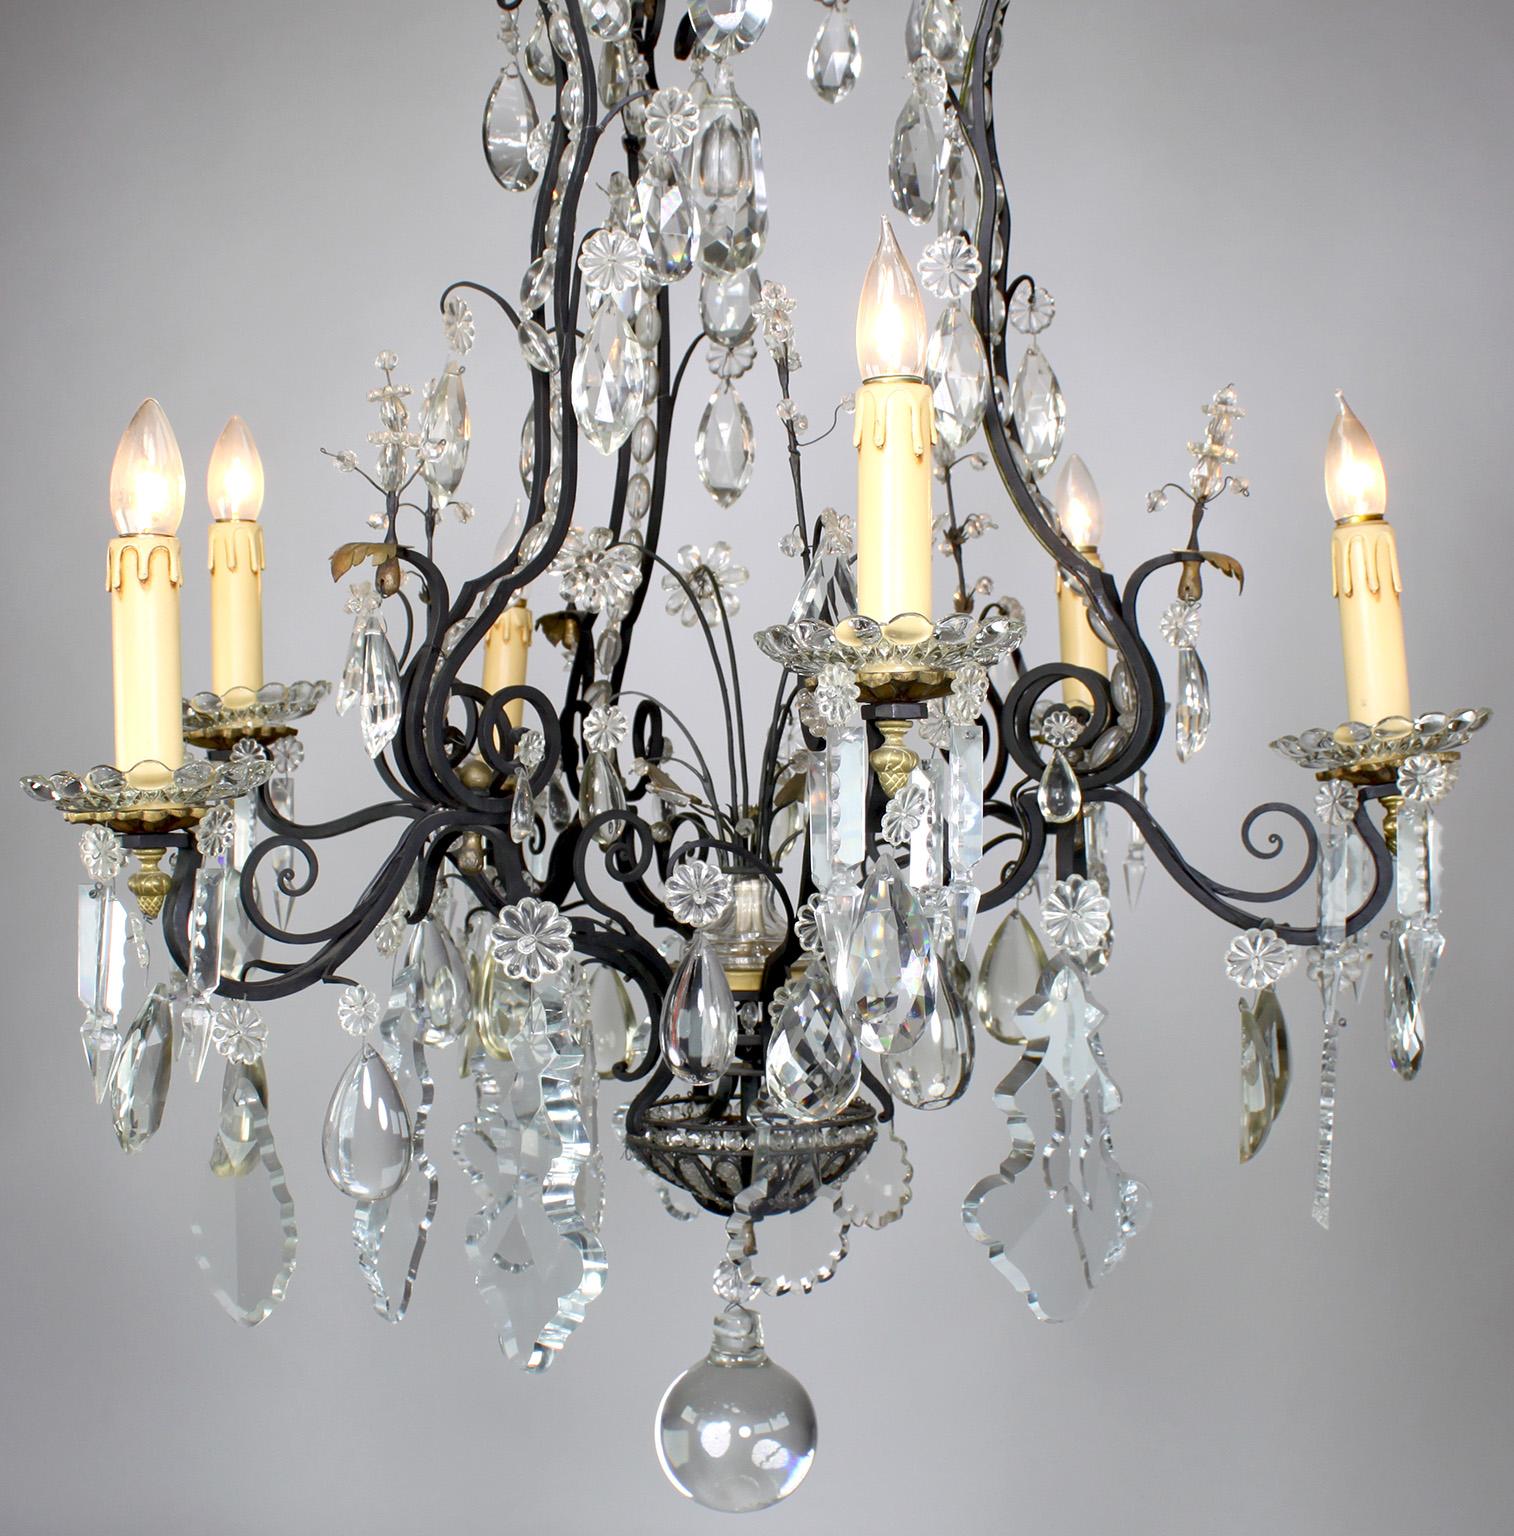 A Fine French Louis XV Style Cut-glass, Wrought Iron and Parcel-Gilt Six Light Chandelier. The scrolled ebonized iron frame surmounted with cut-glass pendants and prisms, the flower glass petals set within a gilt background, with molded glass